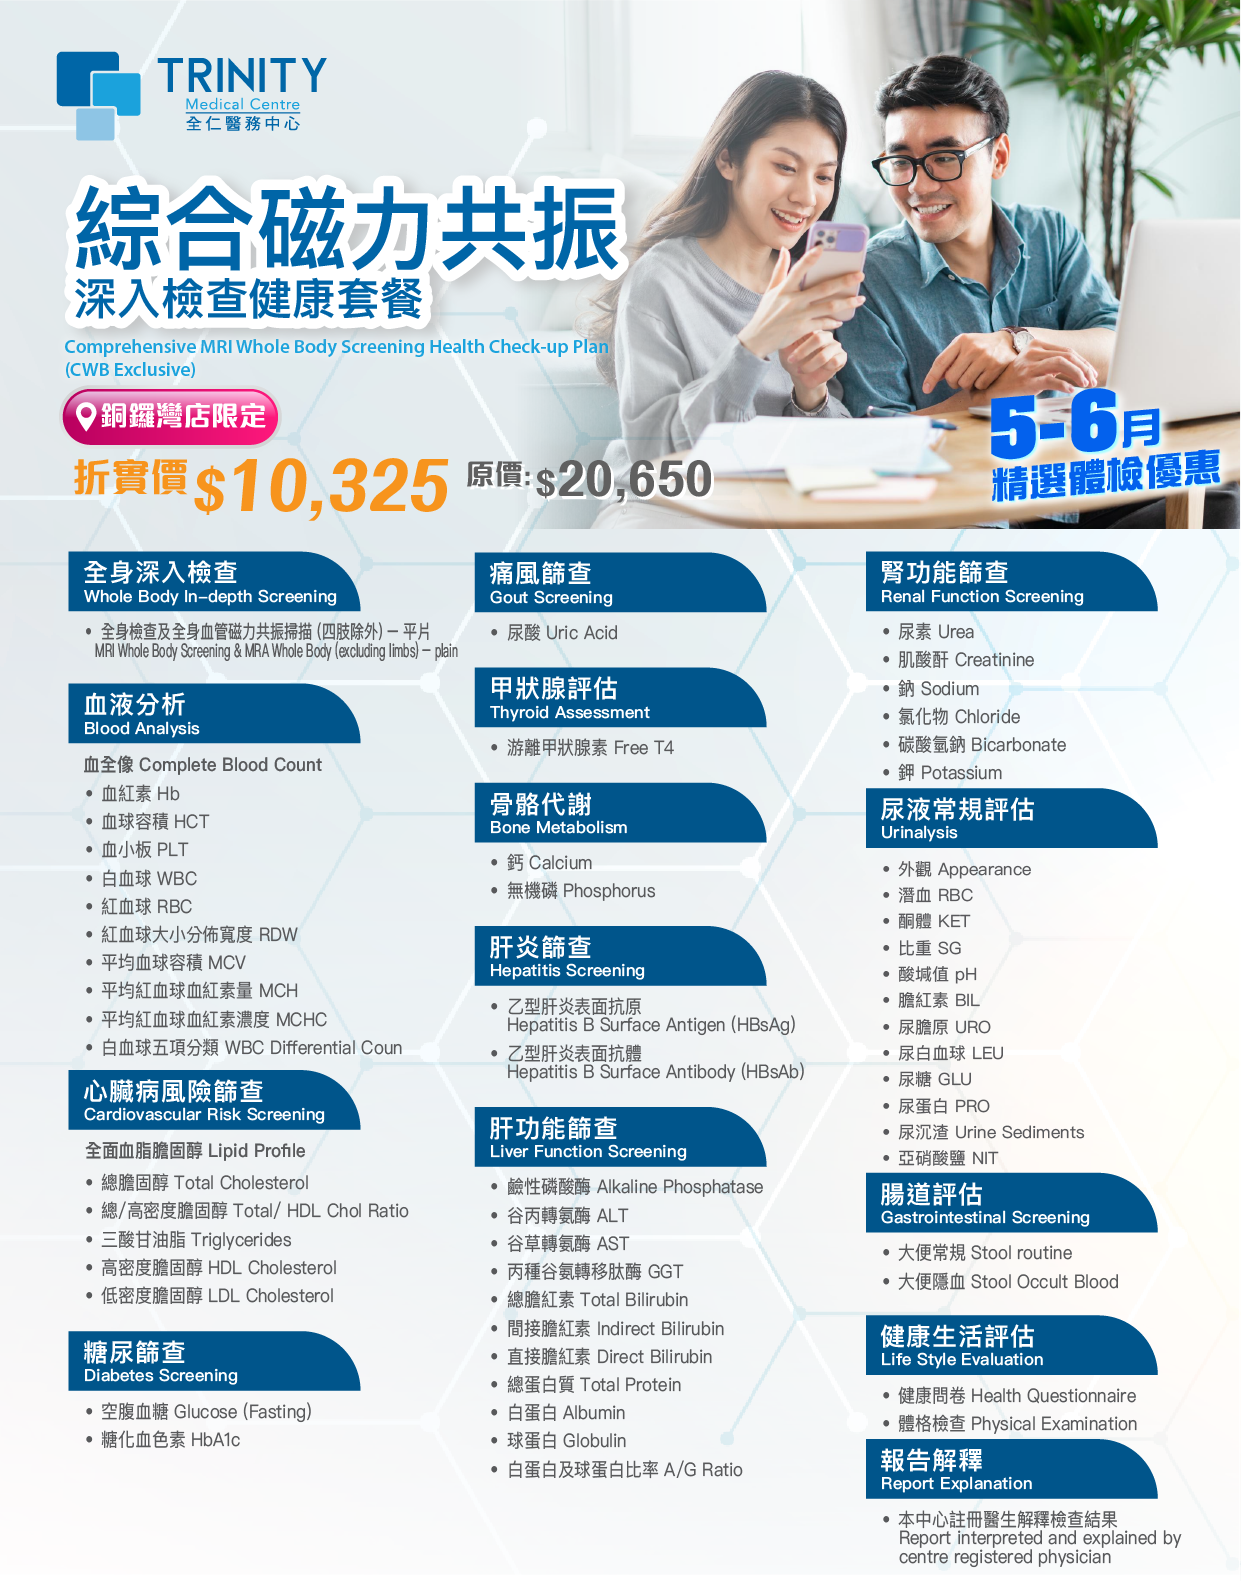 【50% Discount Off - Causeway Bay Clinic Exclusive】Comprehensive MRI Whole Body Screening Health Check-up Plan